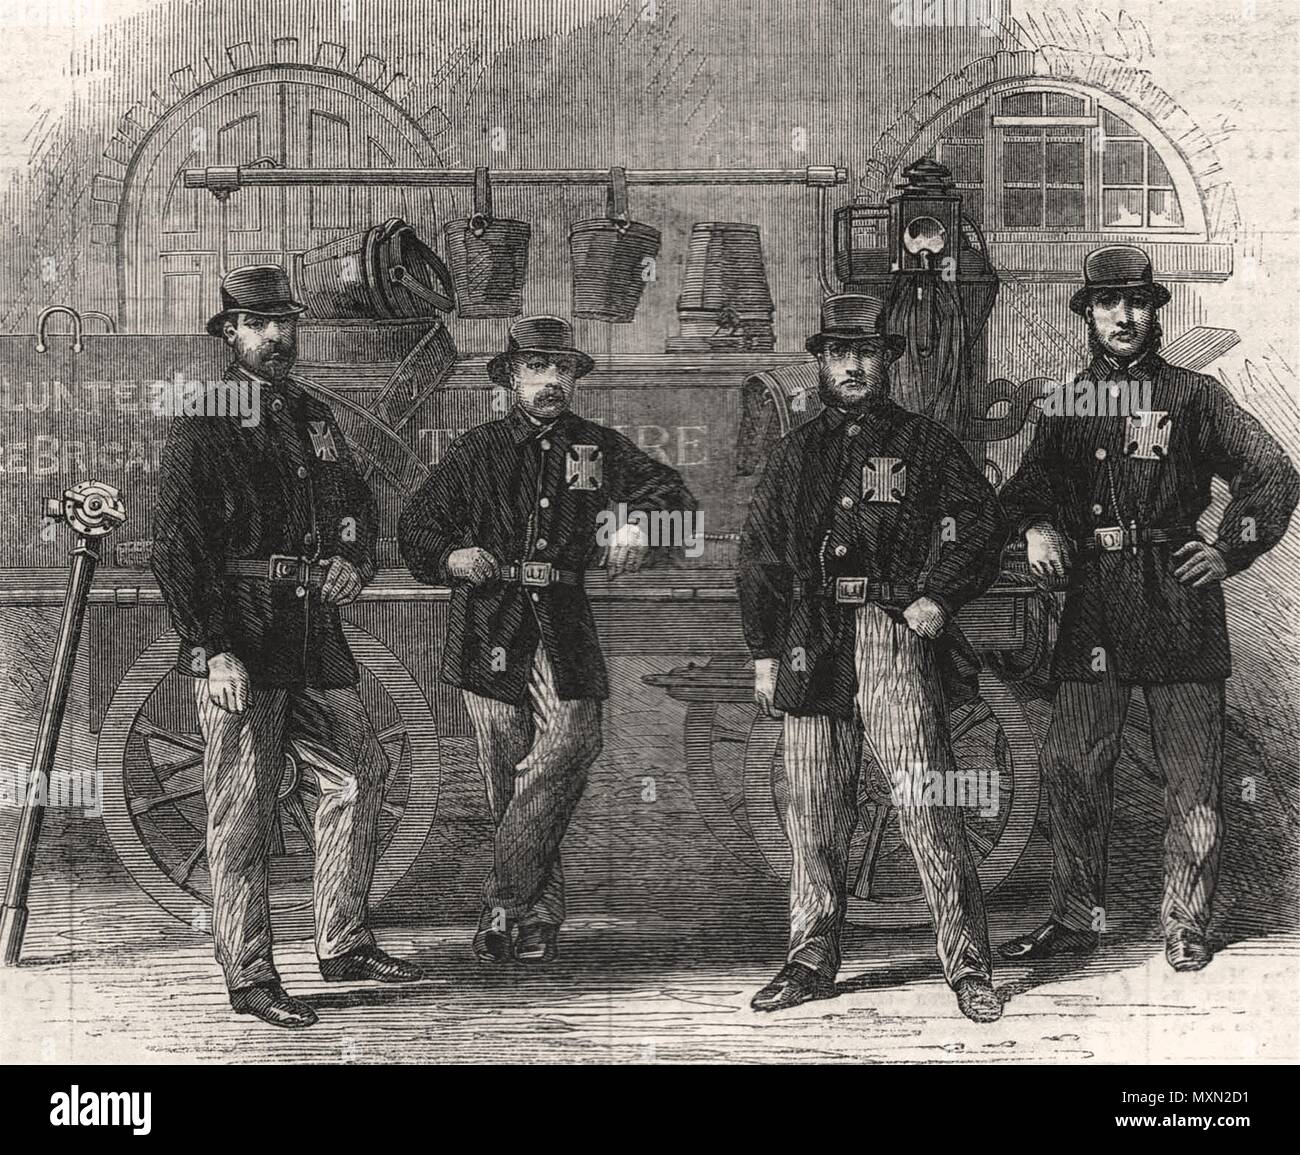 Members of the Coventry Volunteer Fire Brigade. Warwickshire 1862. The Illustrated London News Stock Photo